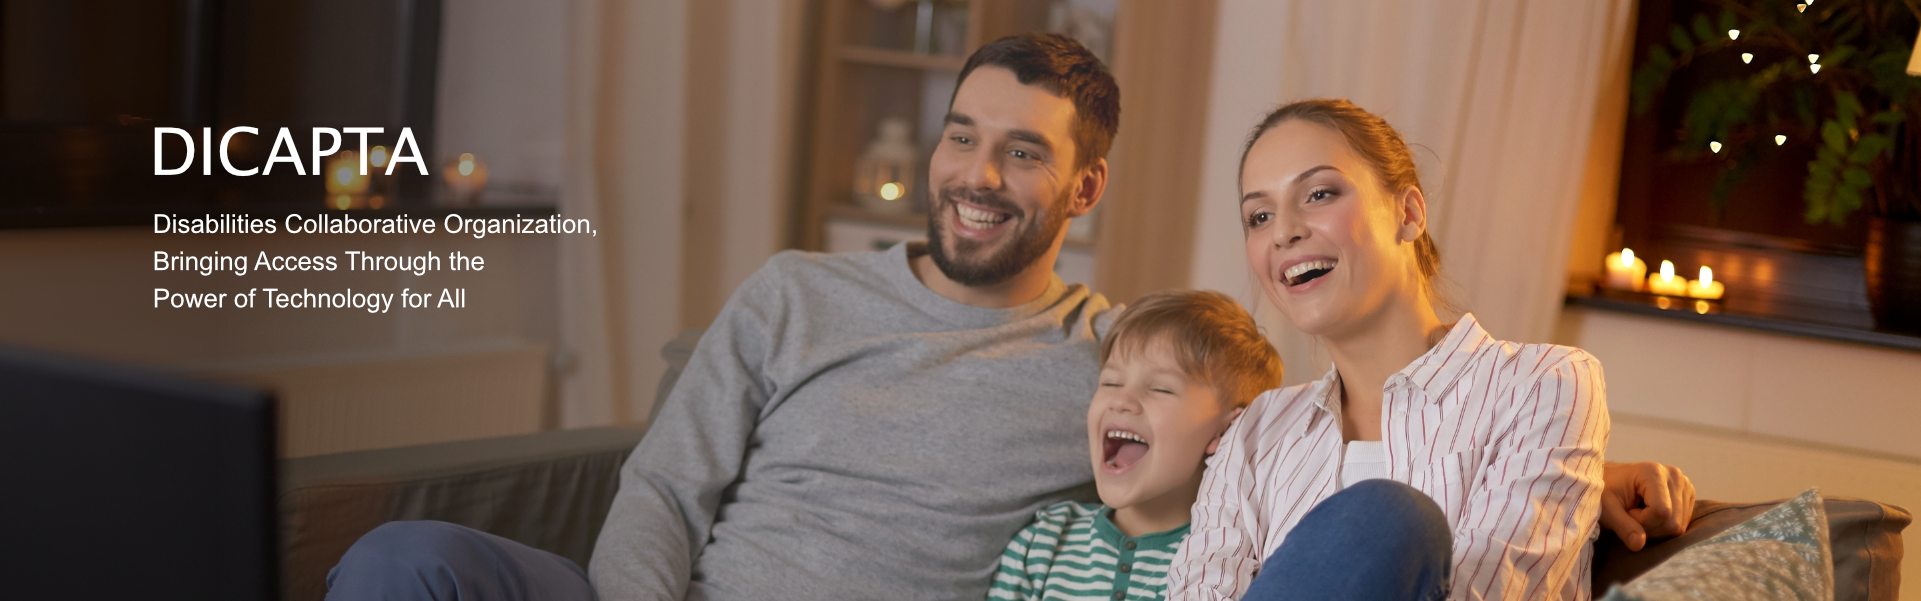 Text: Dicapta. Disabilities Collaborative Organization, Bringing access Through the Power of Technology for All. Background image: A family watches TV and laughs.